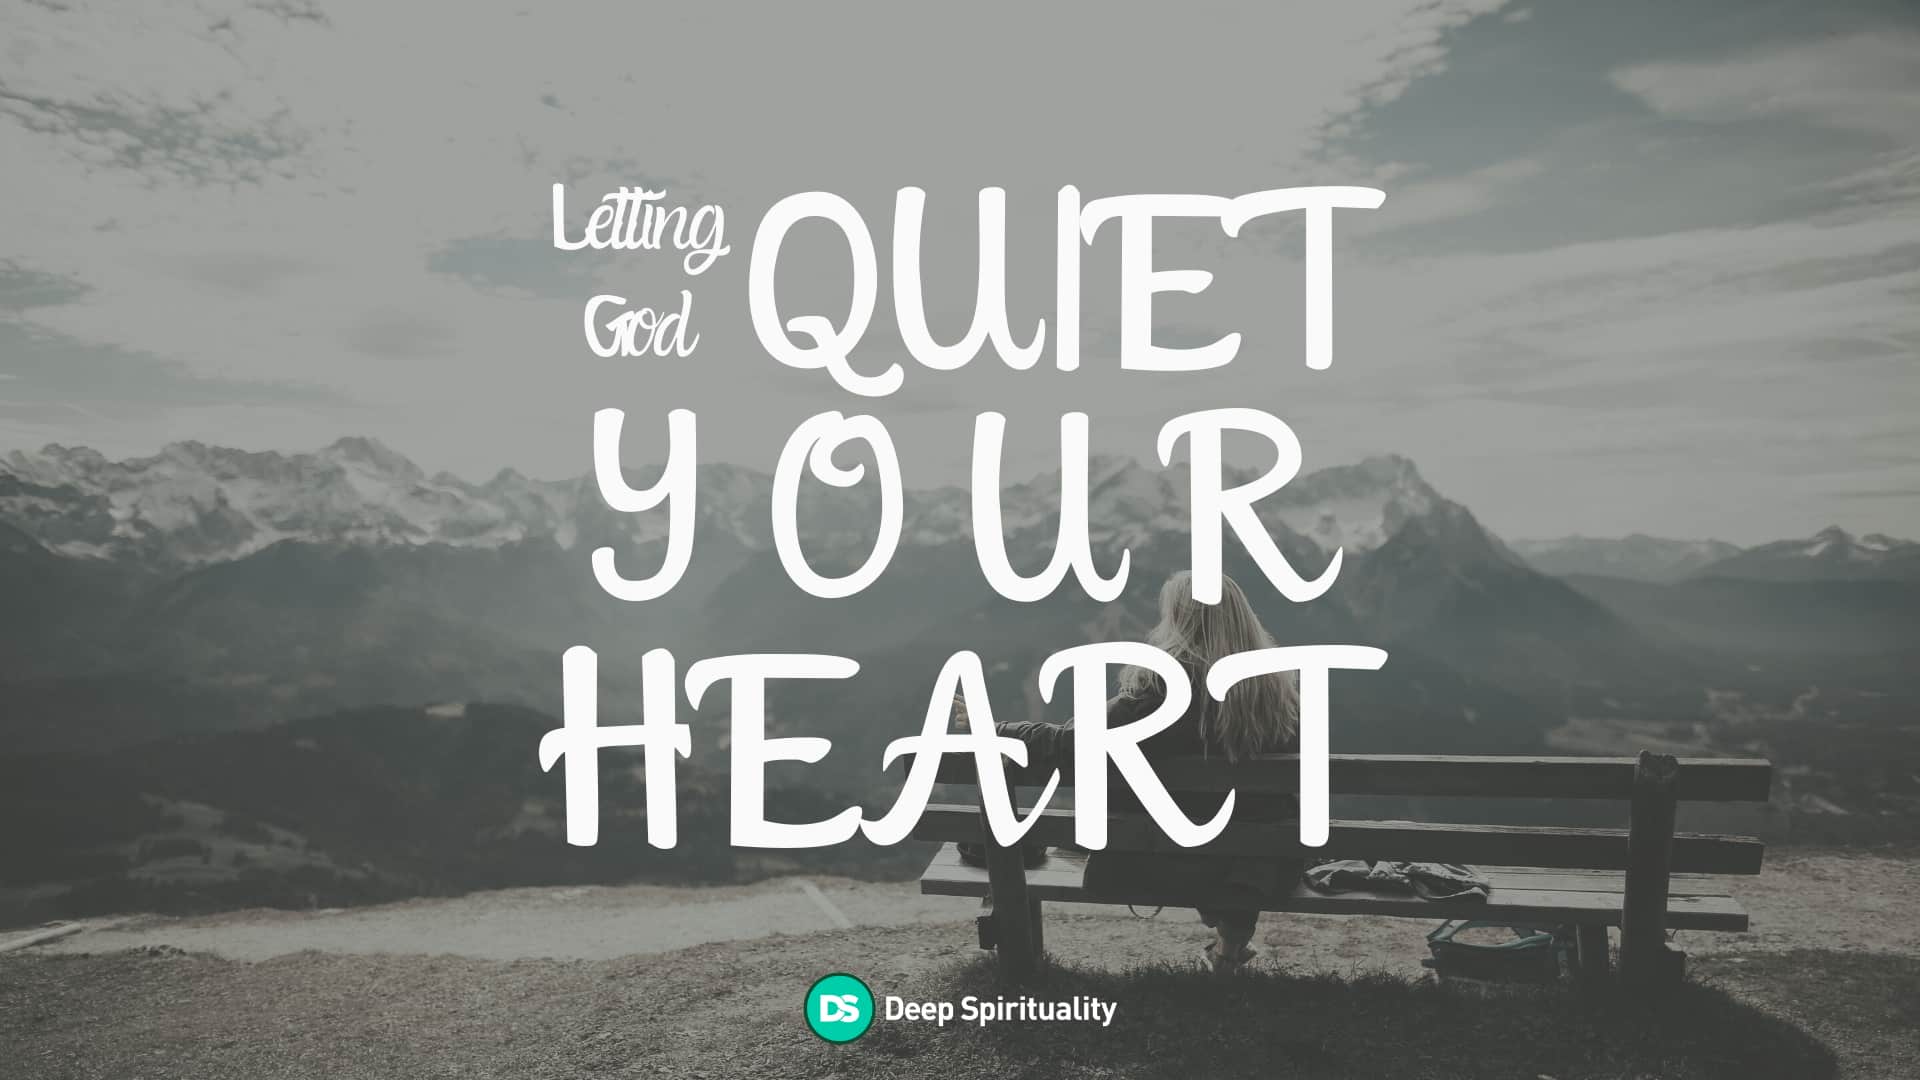 The Ultimate Guide to Letting God Quiet Your Heart 10